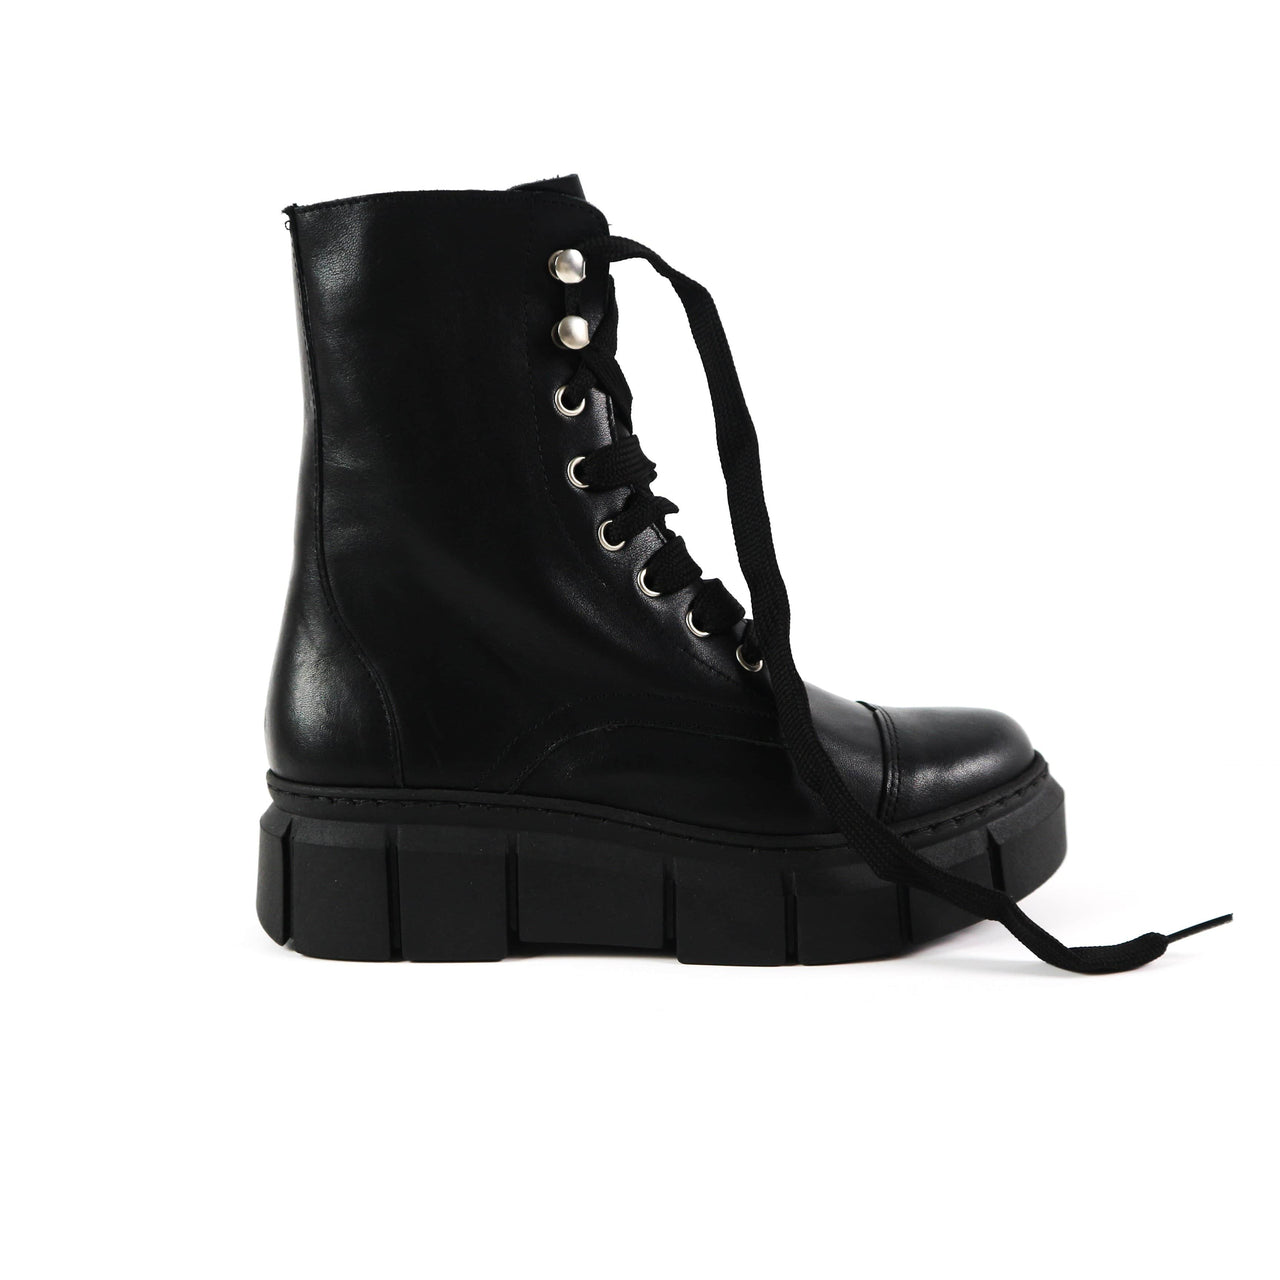 Funky Black Boots | BECKY